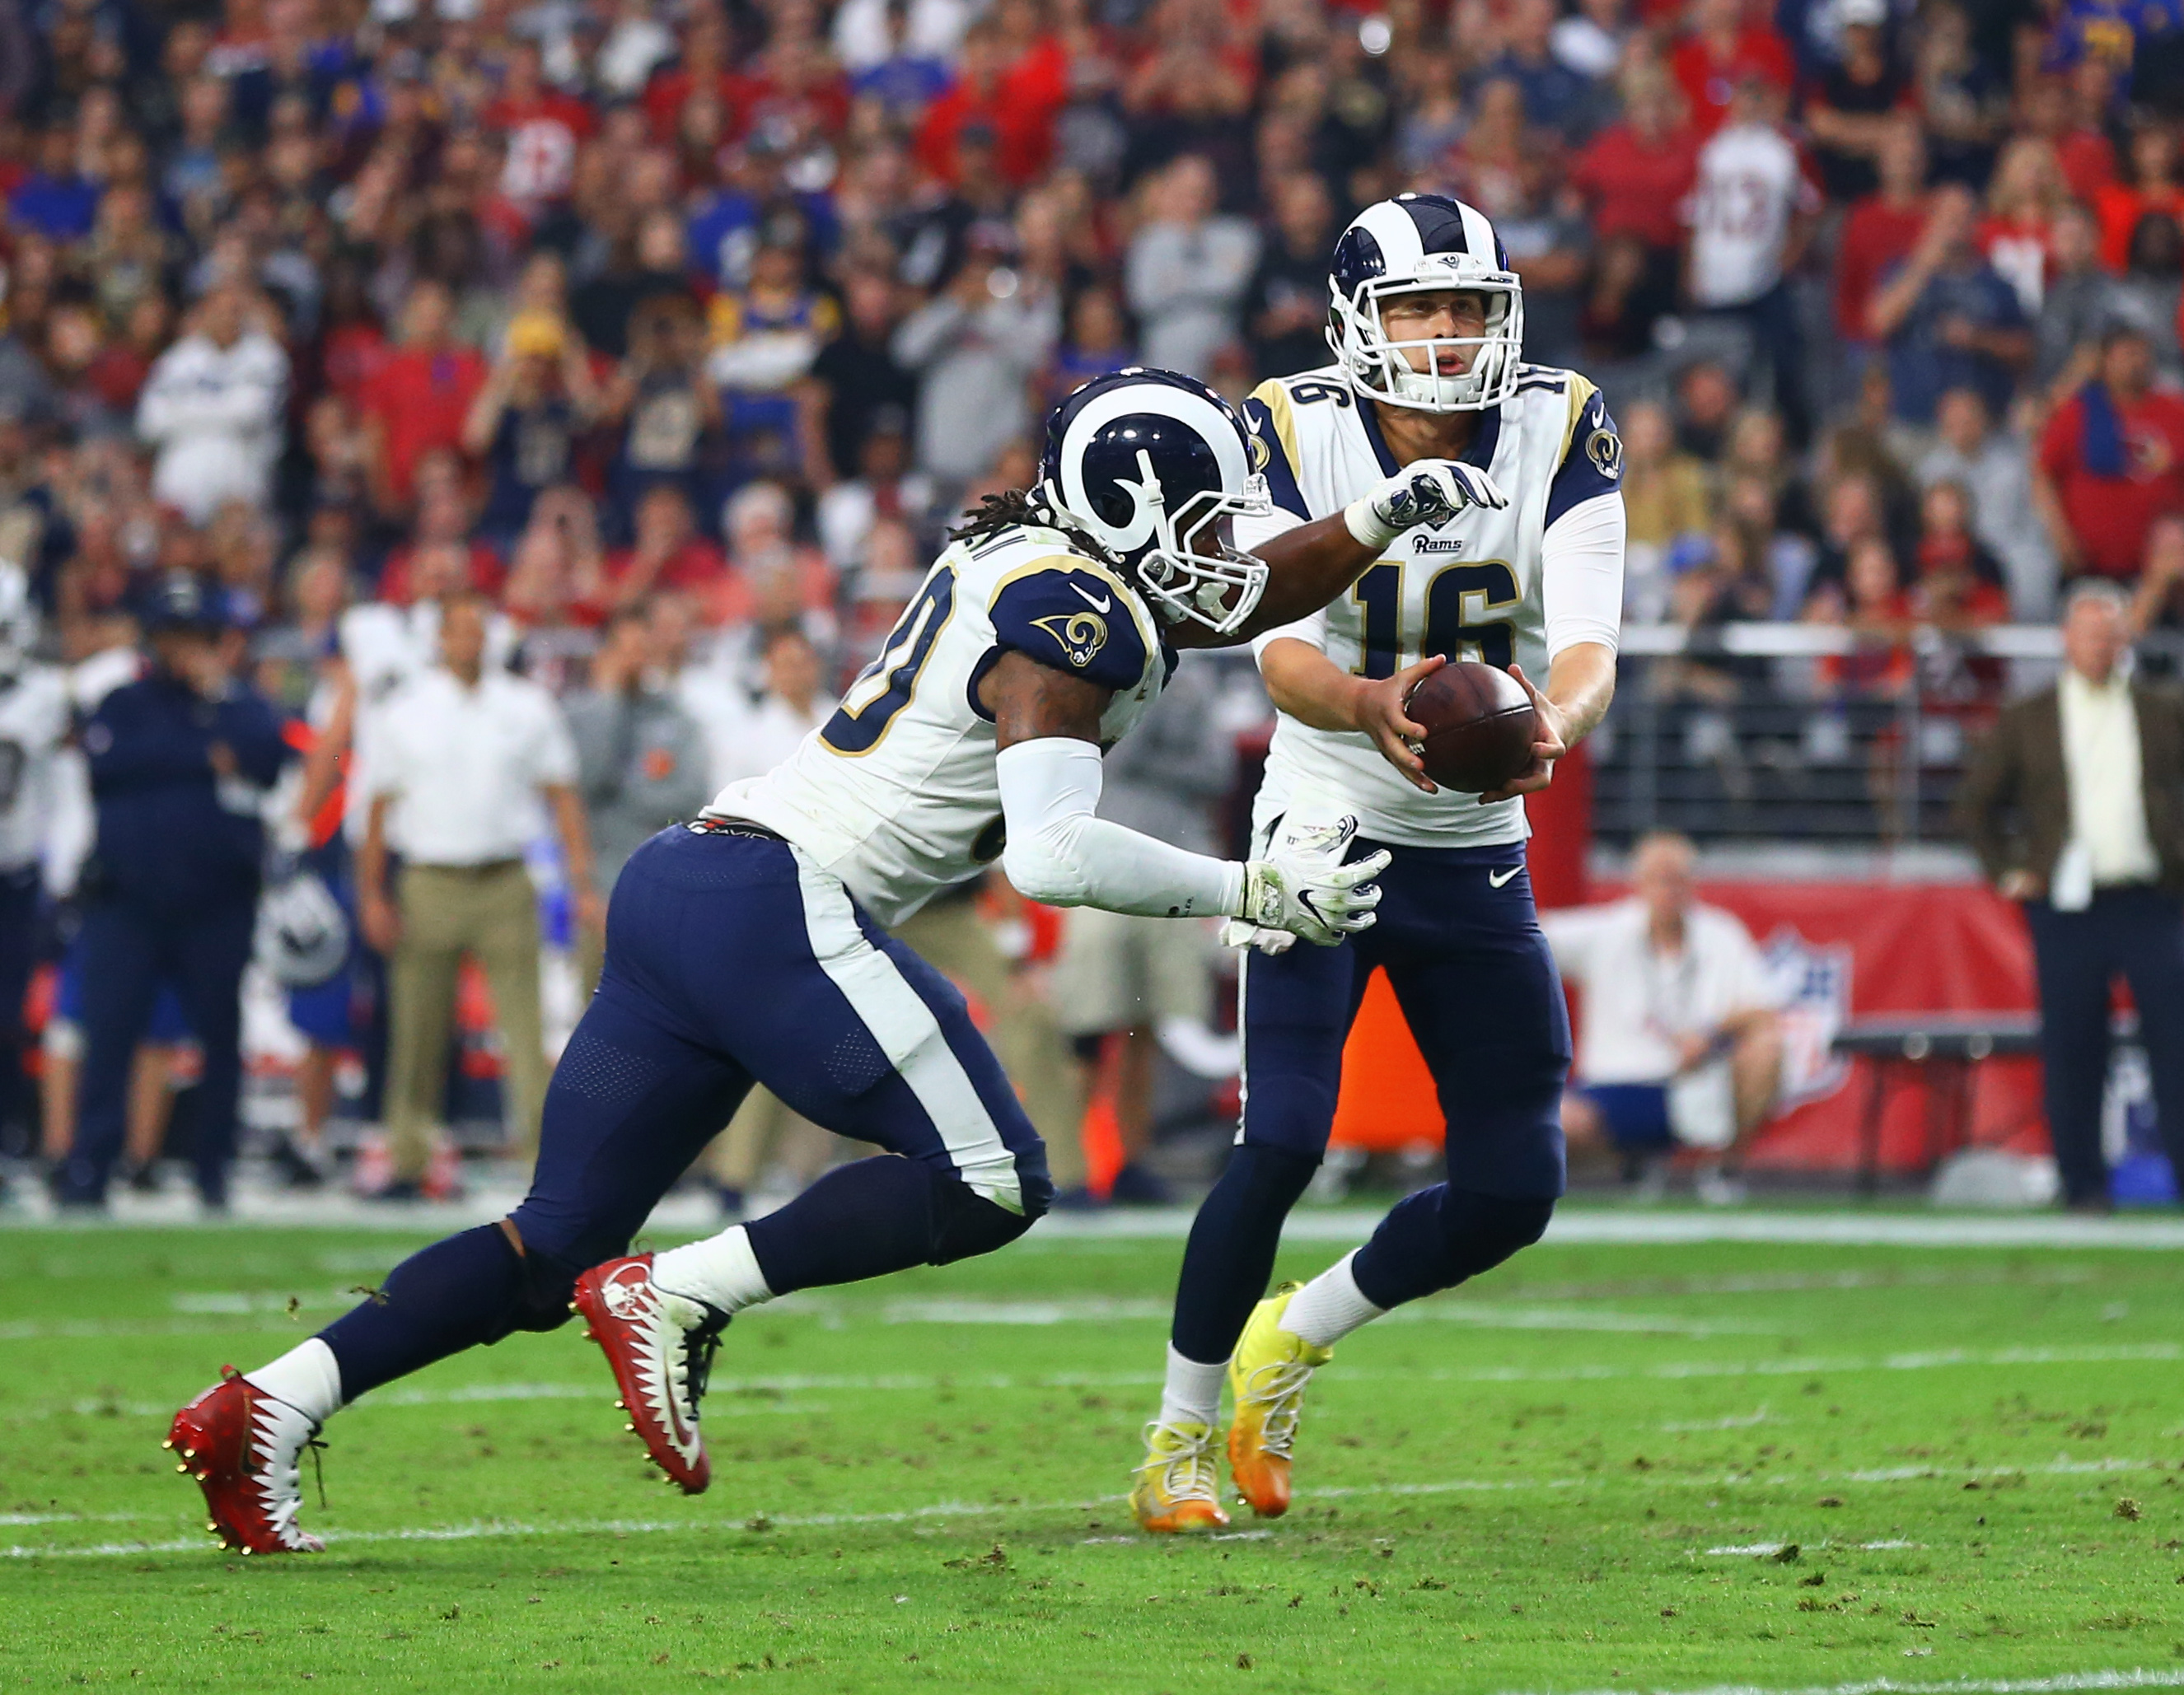 Los Angeles Rams QB Jared Goff hands the ball to RB Todd Gurley in Week 13 against the Arizona Cardinals, December 3, 2017.